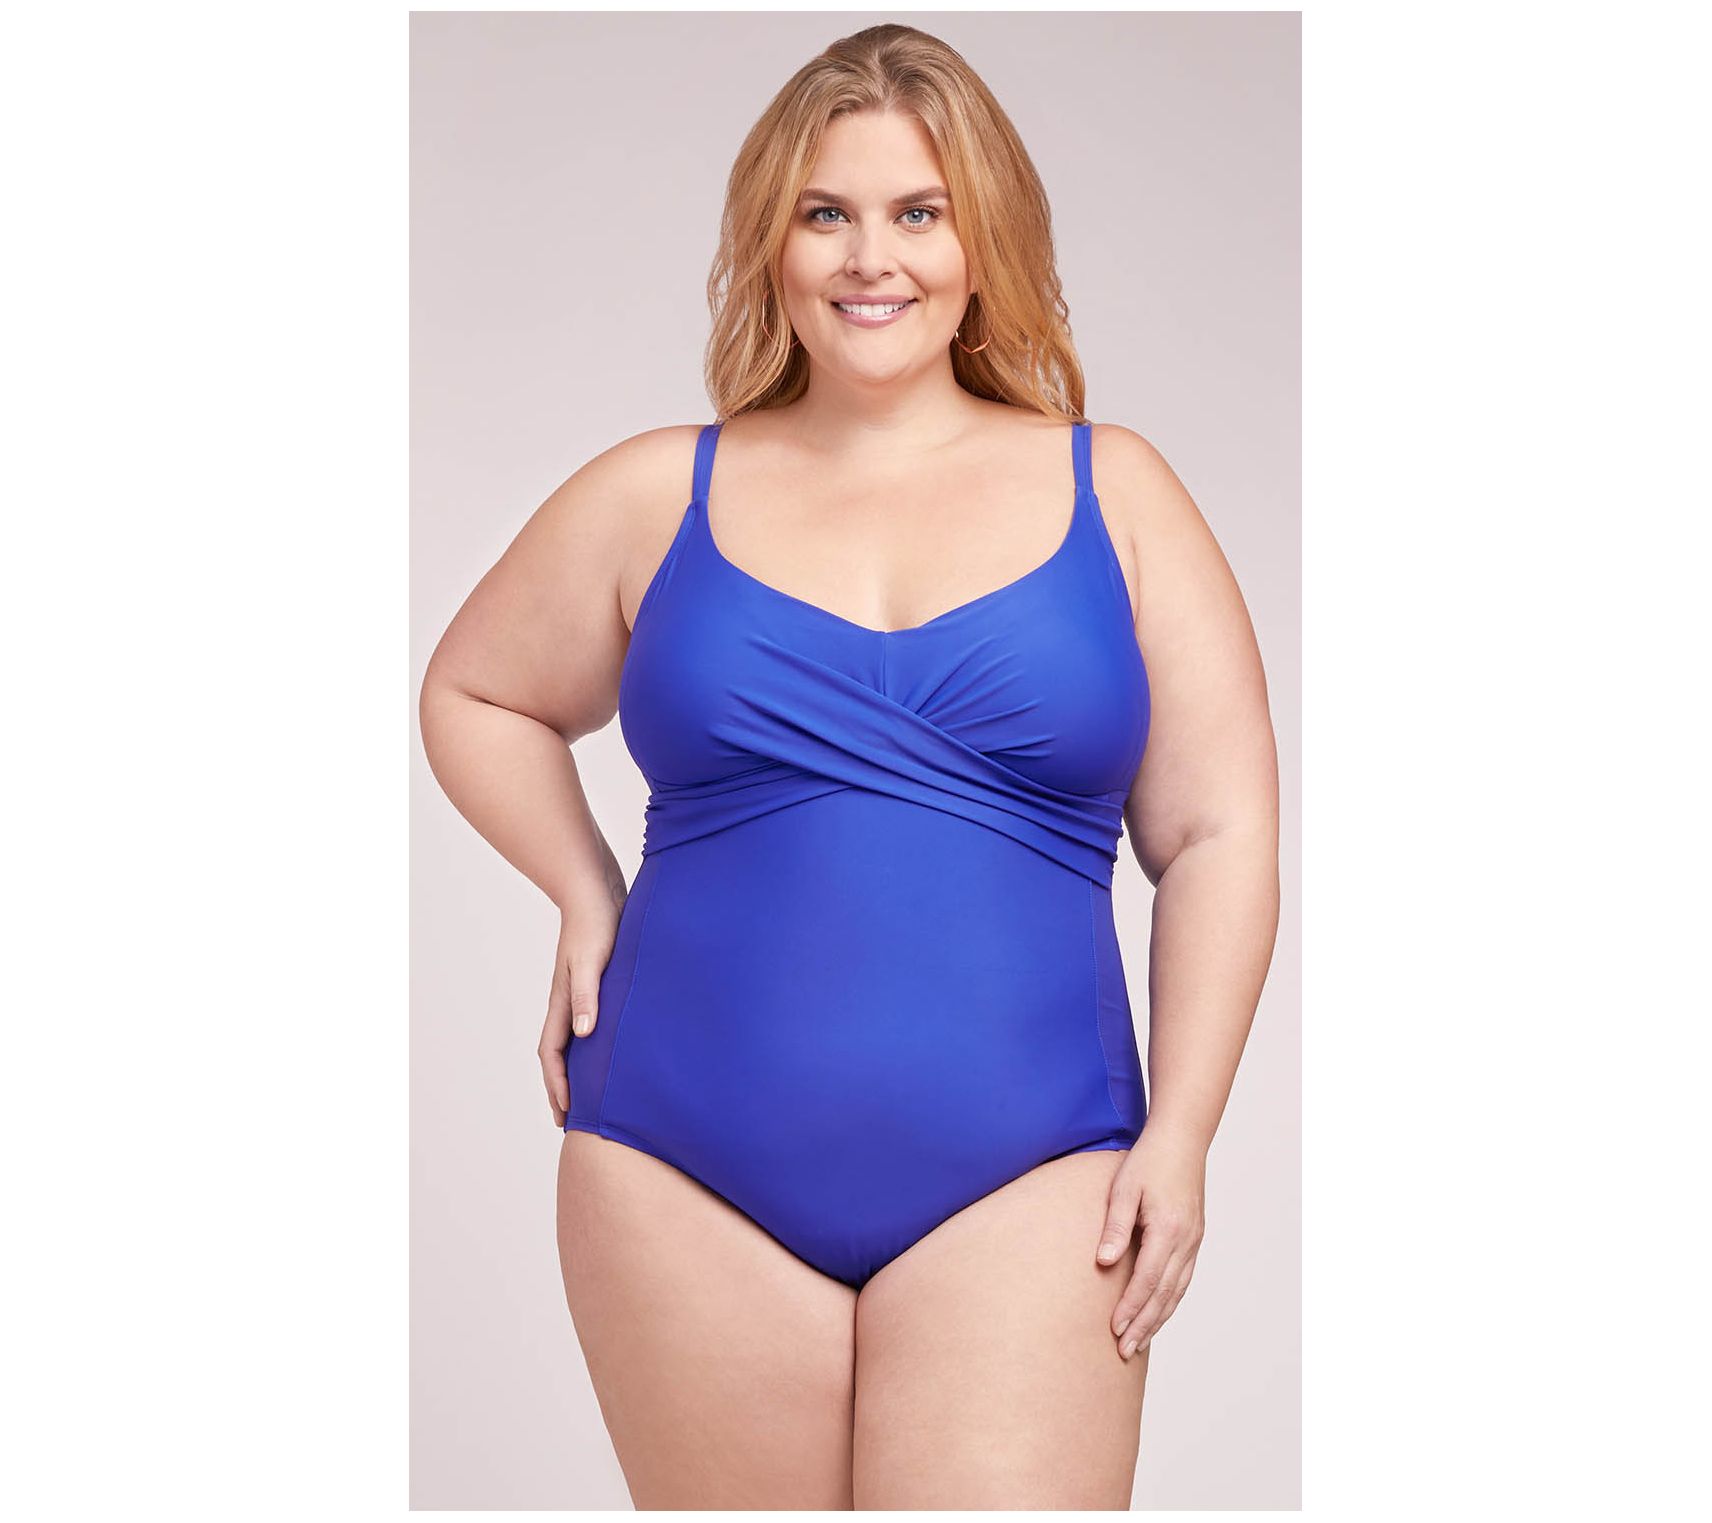 LYSA-Love Your Size Always One-Piece with Mesh-Blue - QVC.com